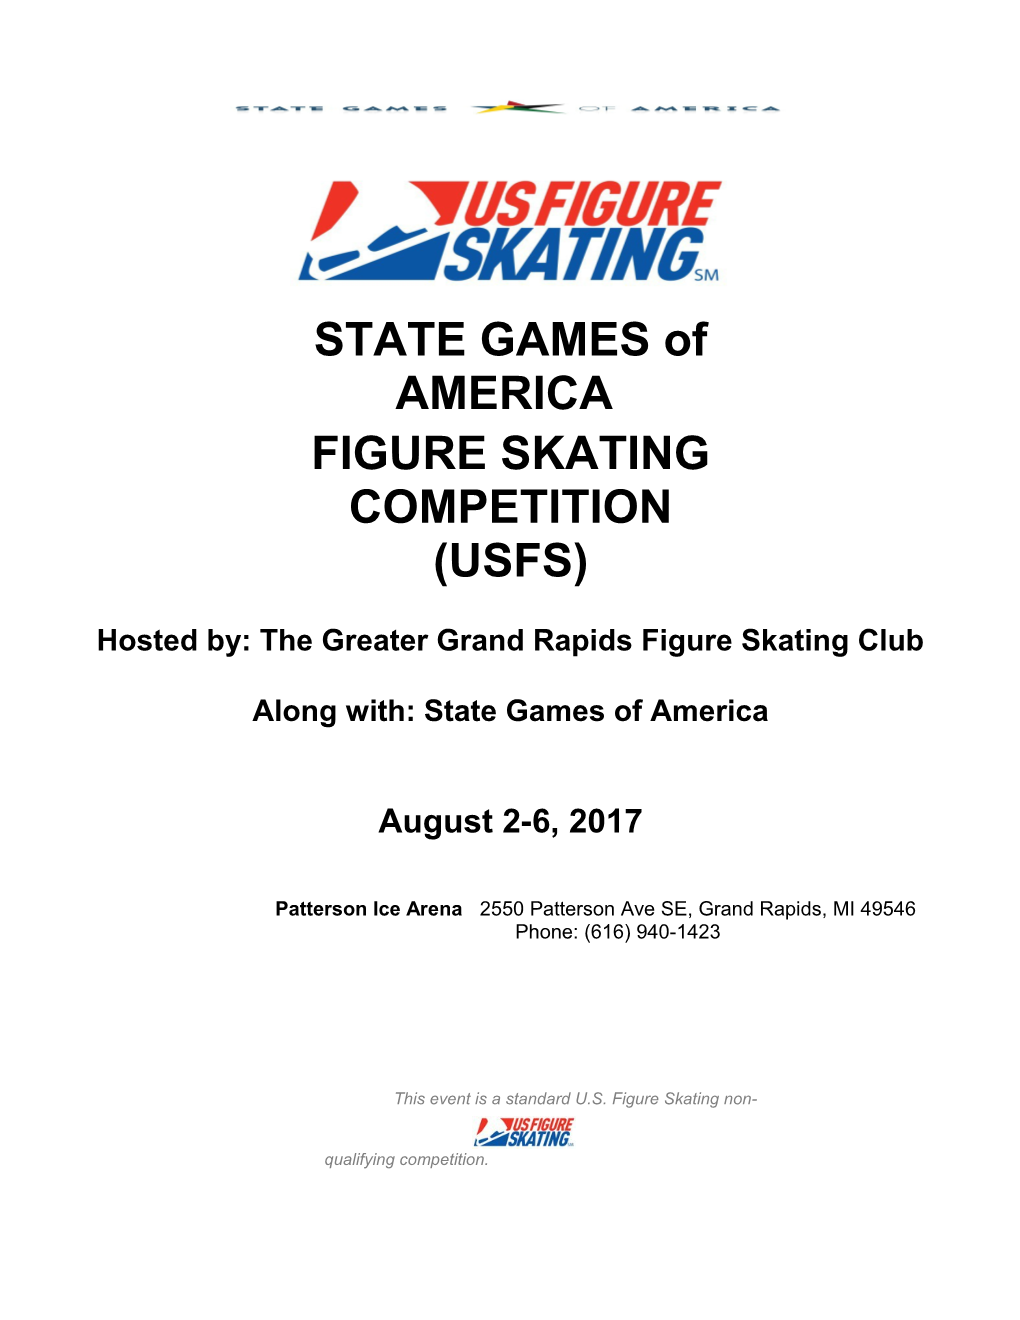 Hosted By: the Greater Grand Rapids Figure Skating Club